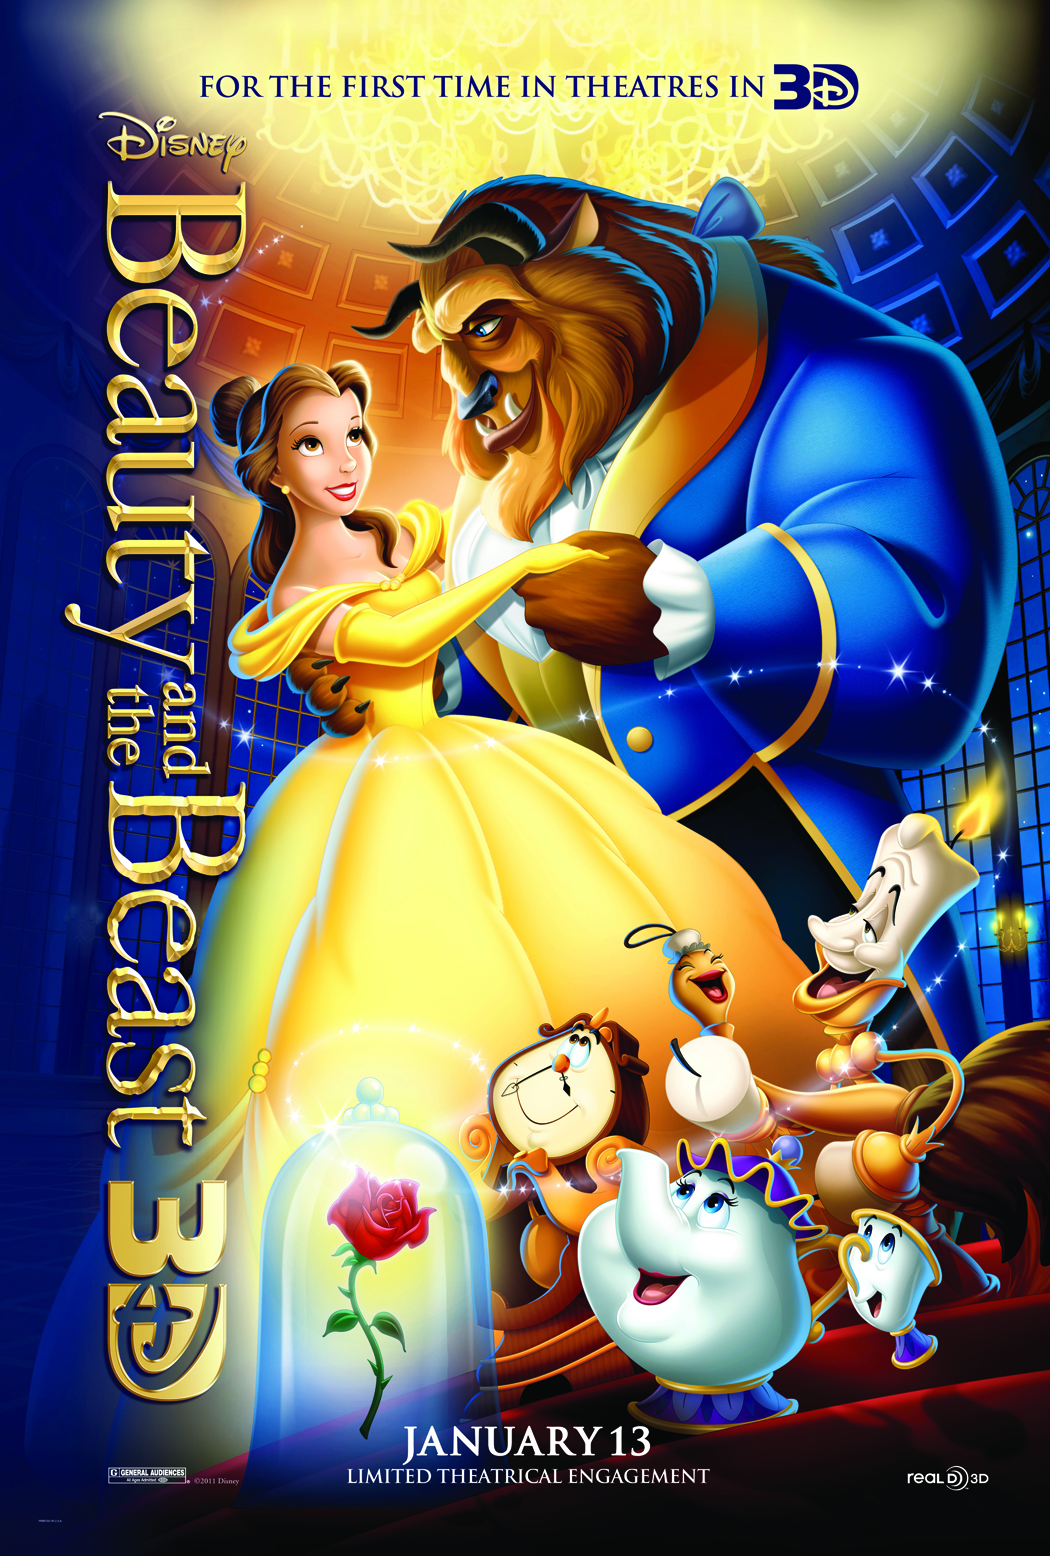 Release Day Round-Up: BEAUTY AND THE BEAST 3D | BigFanBoy.com